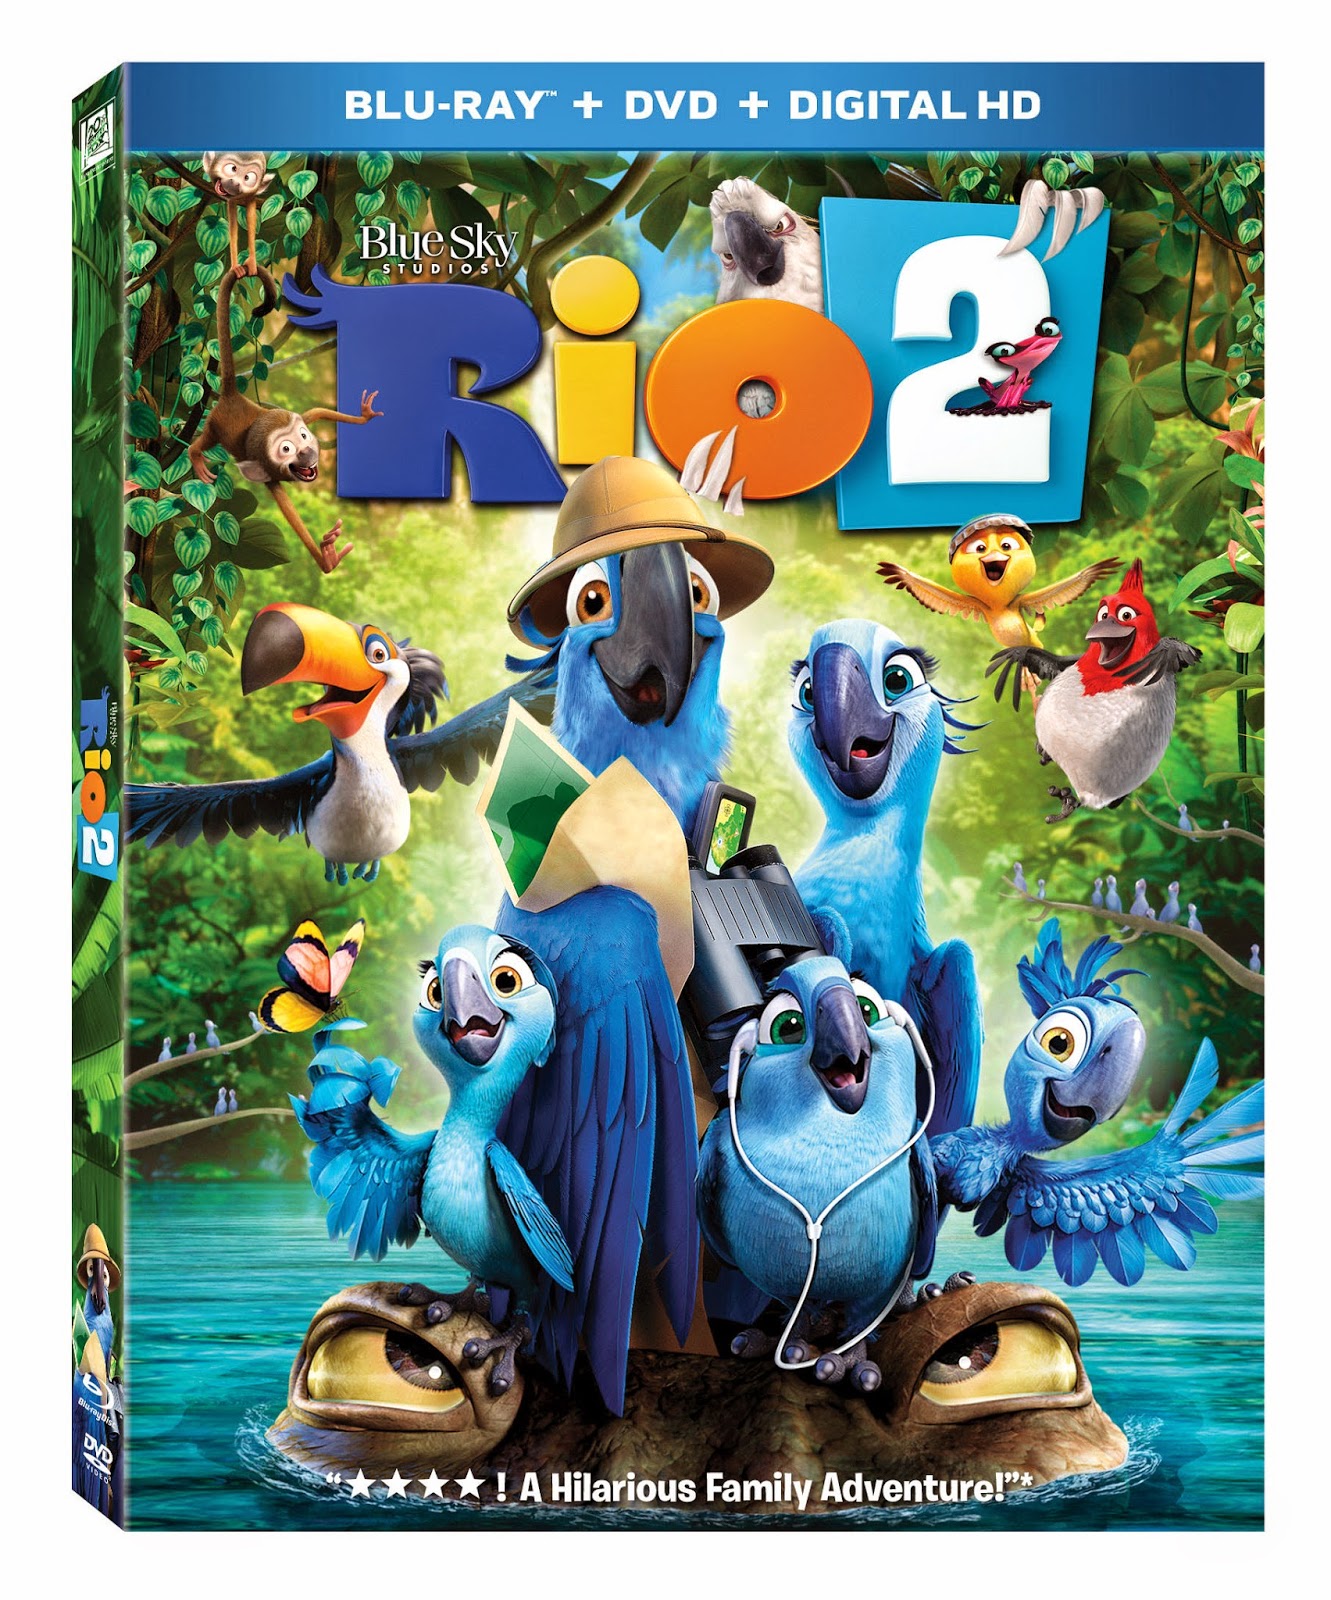 Rio 2 Blu-ray giveaway by Yes/No Films